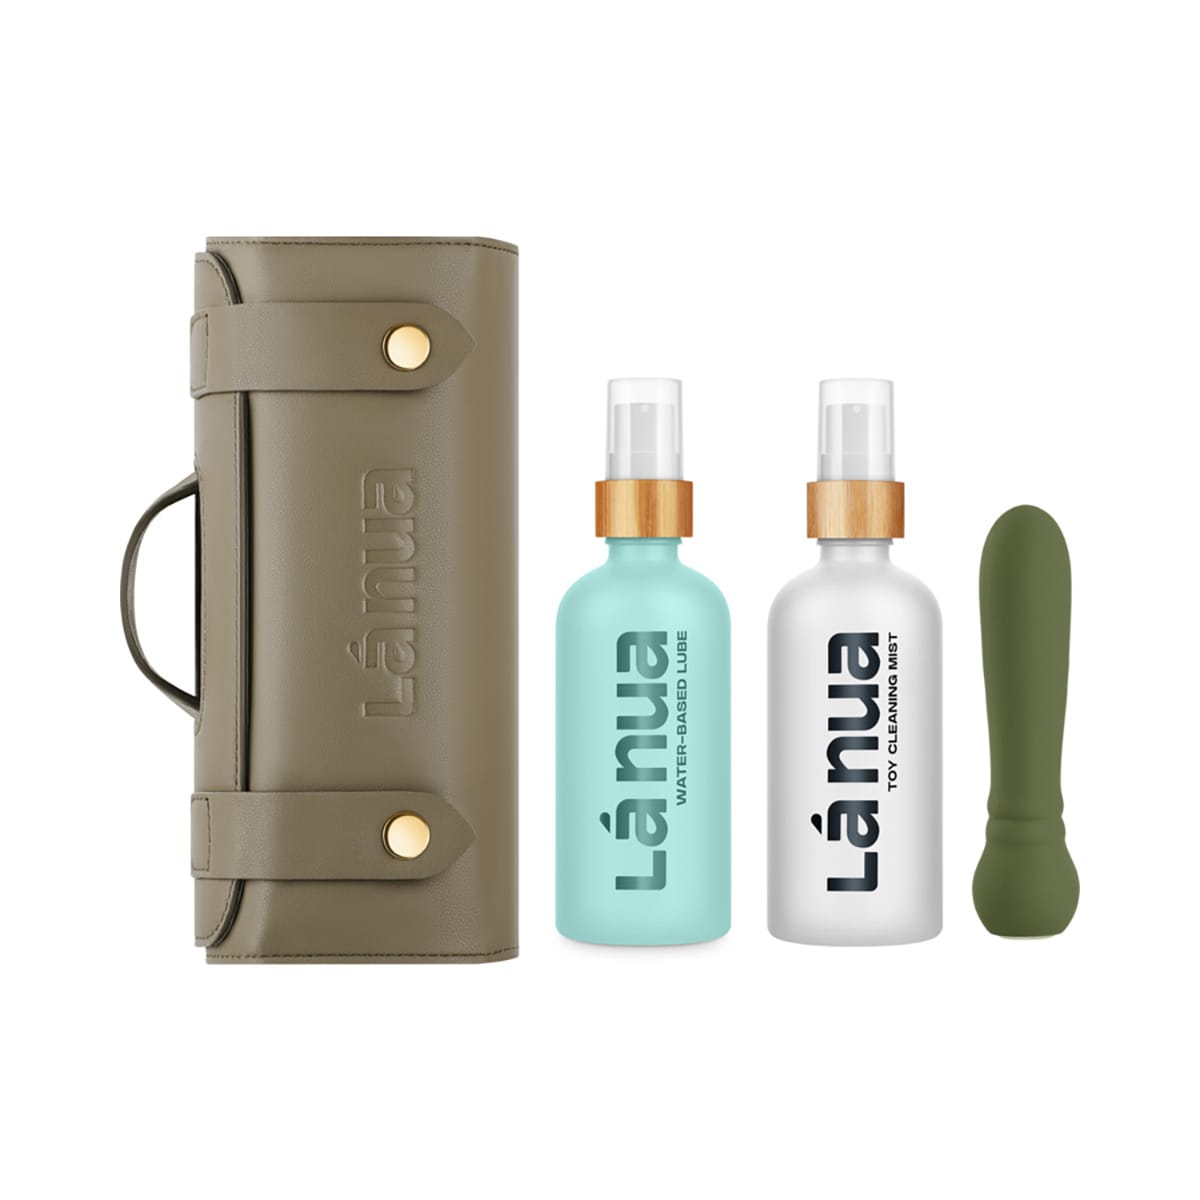 Buy a La Nua Gift Bag 1 Ultra Bullet + 100Ml Mist Toy Cleaner + 100Ml Unflavored WaterBased Lube vibrator.